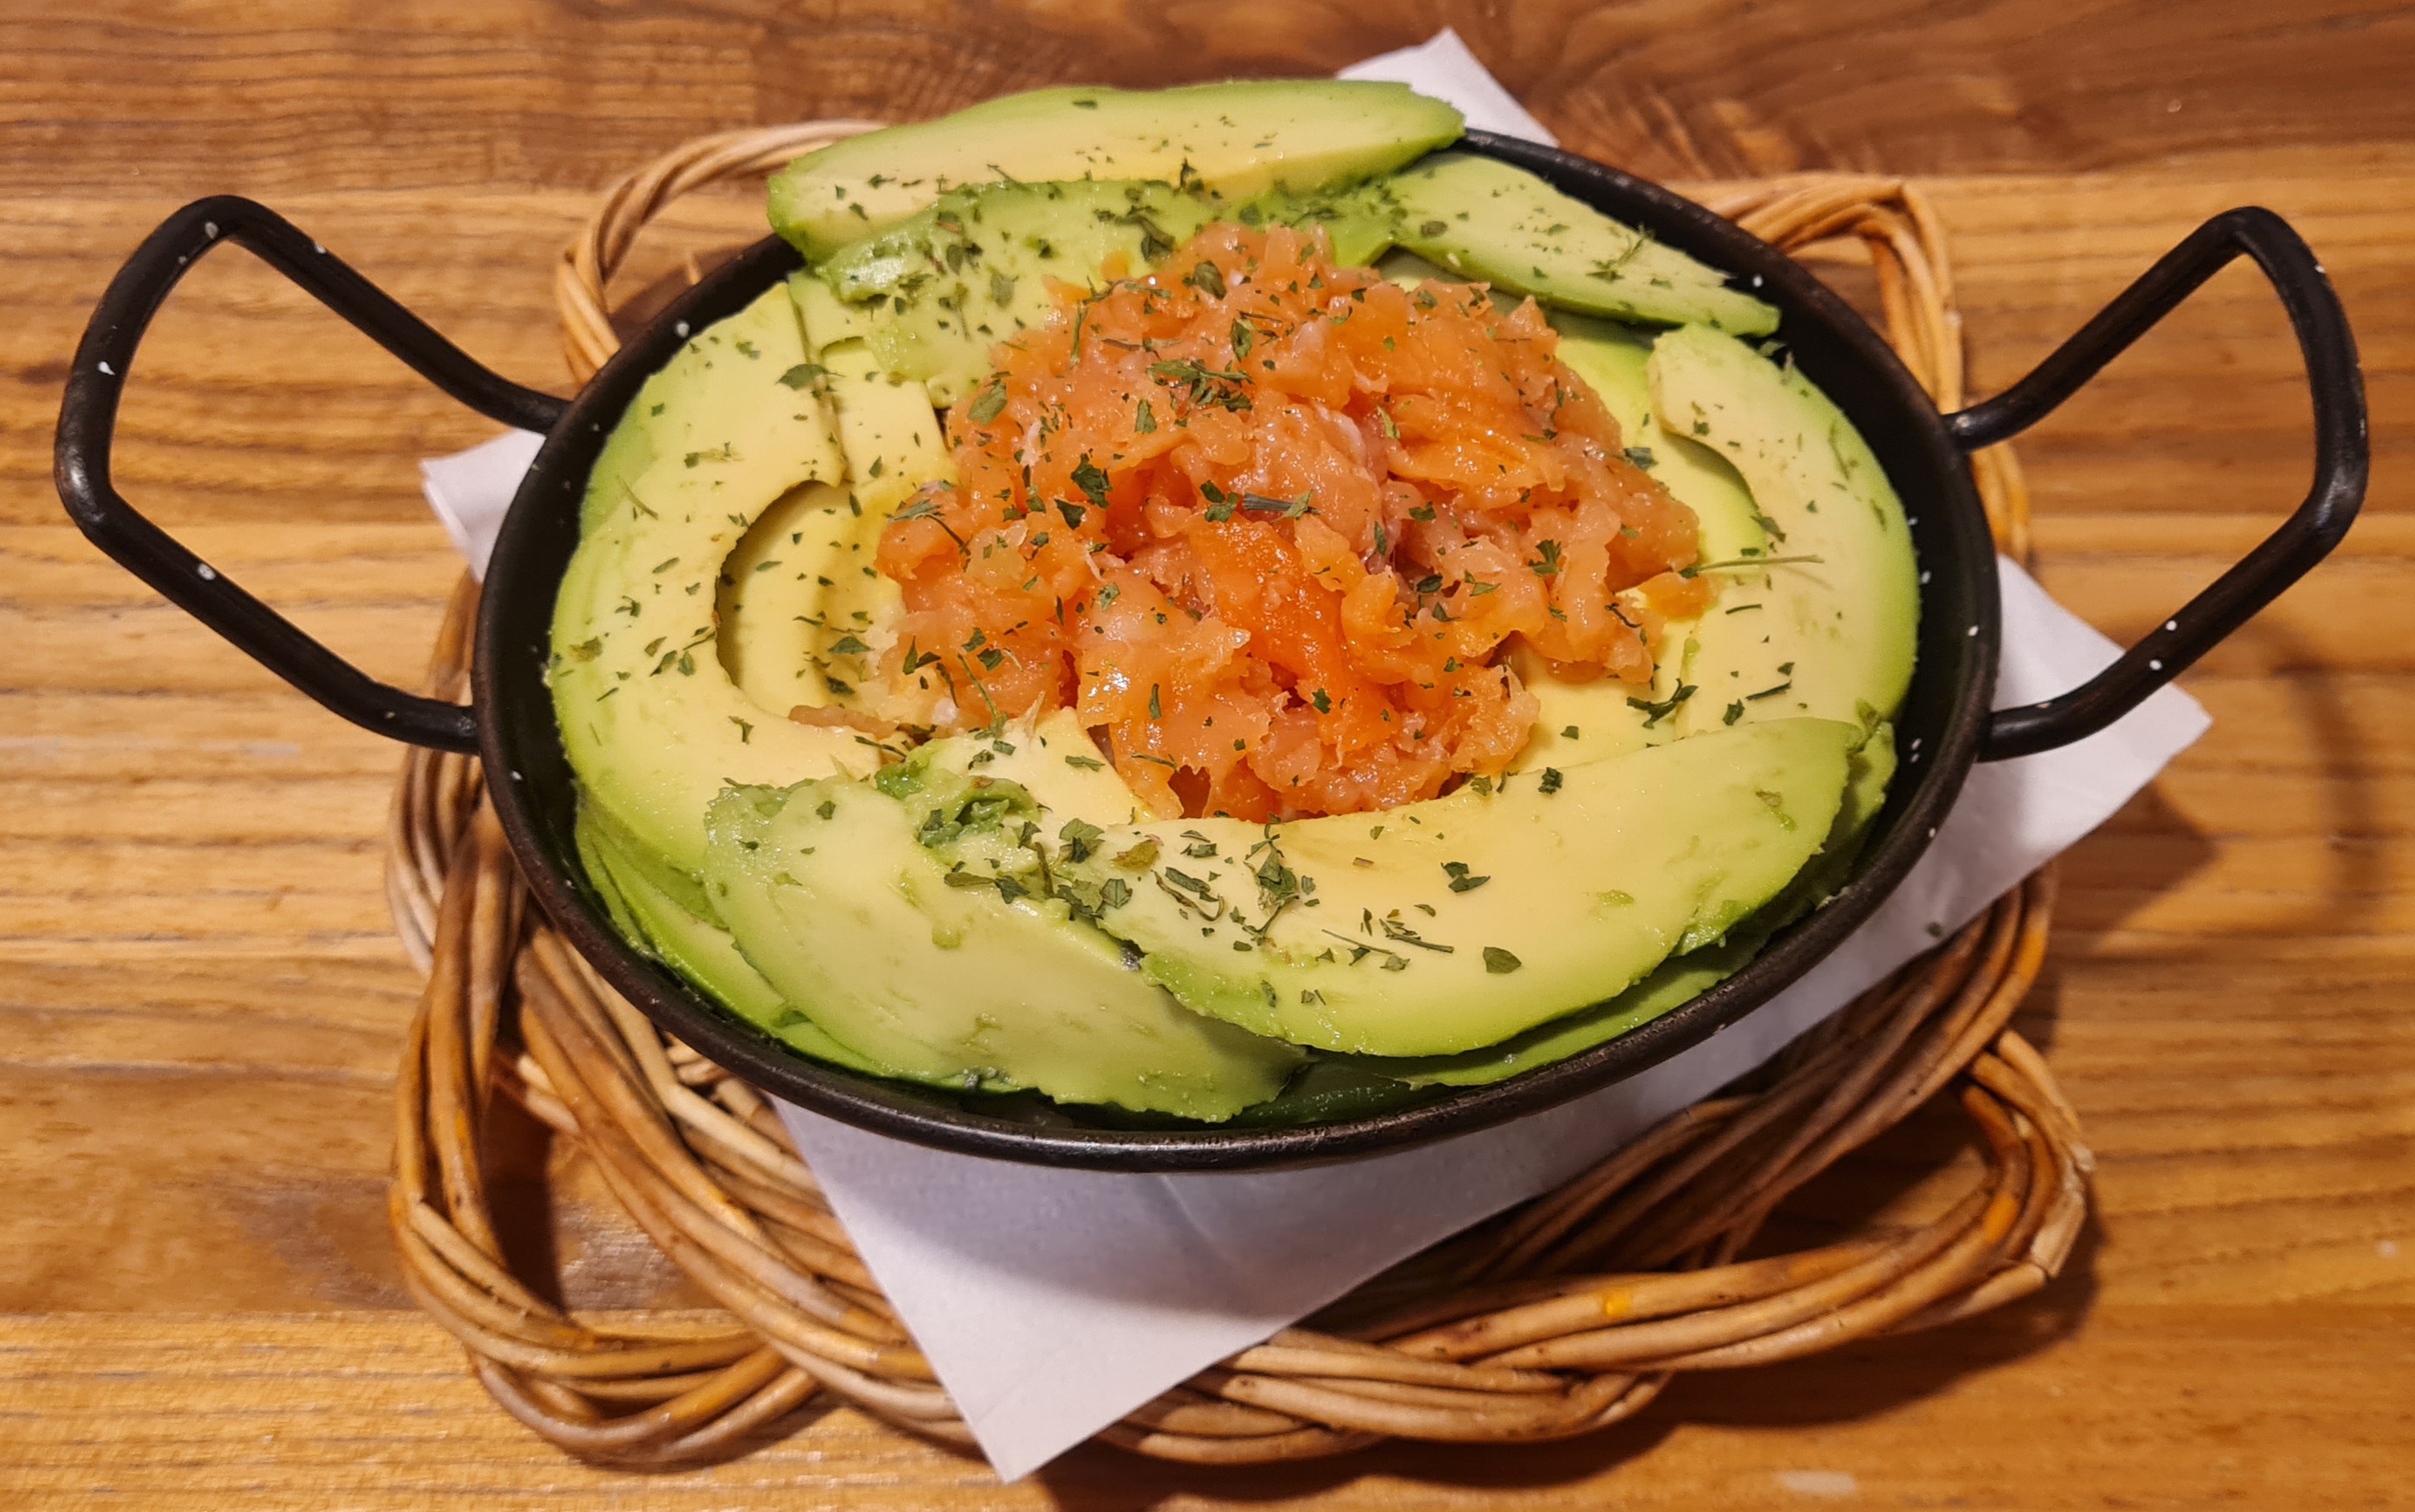 Scrambled eggs with potatoes and onion, topped with avocado and smoked salmon